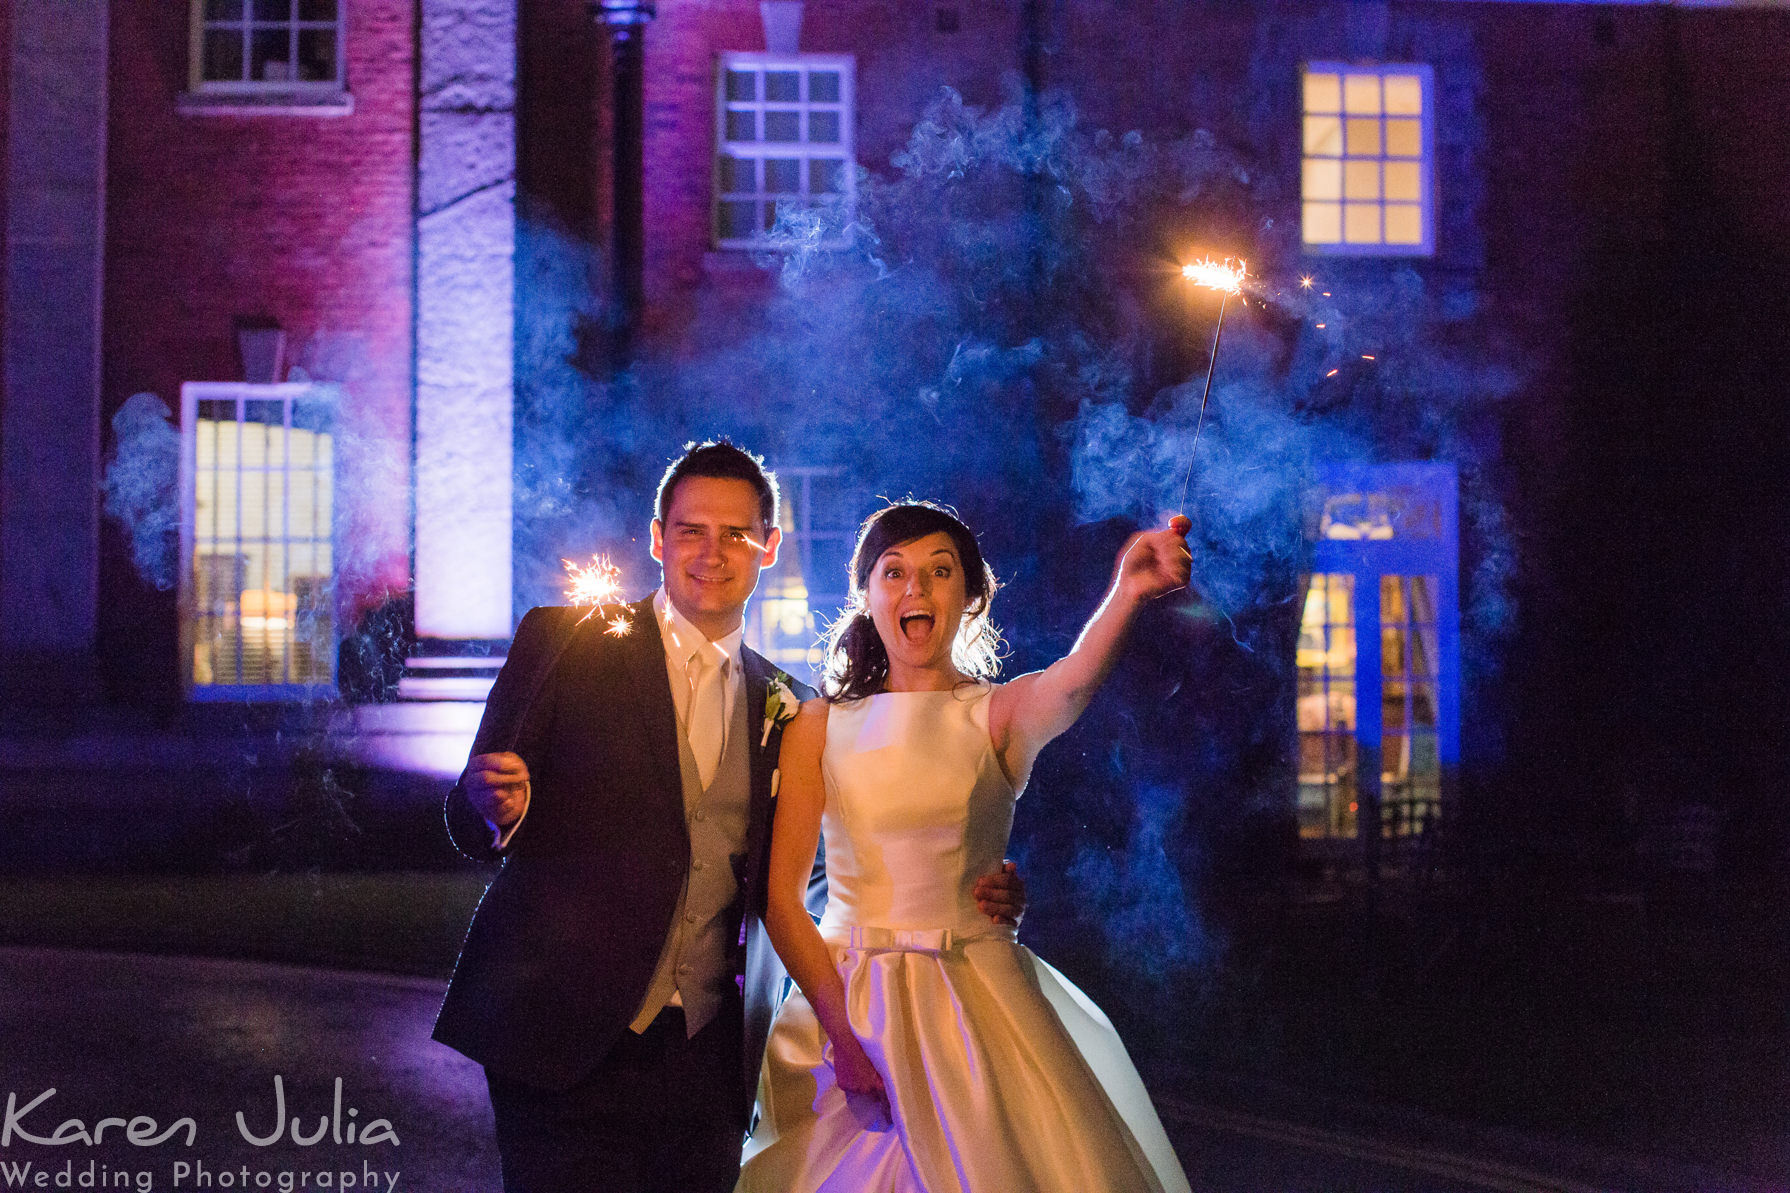 bride and groom holding sparklers for a photo at their autumn wedding